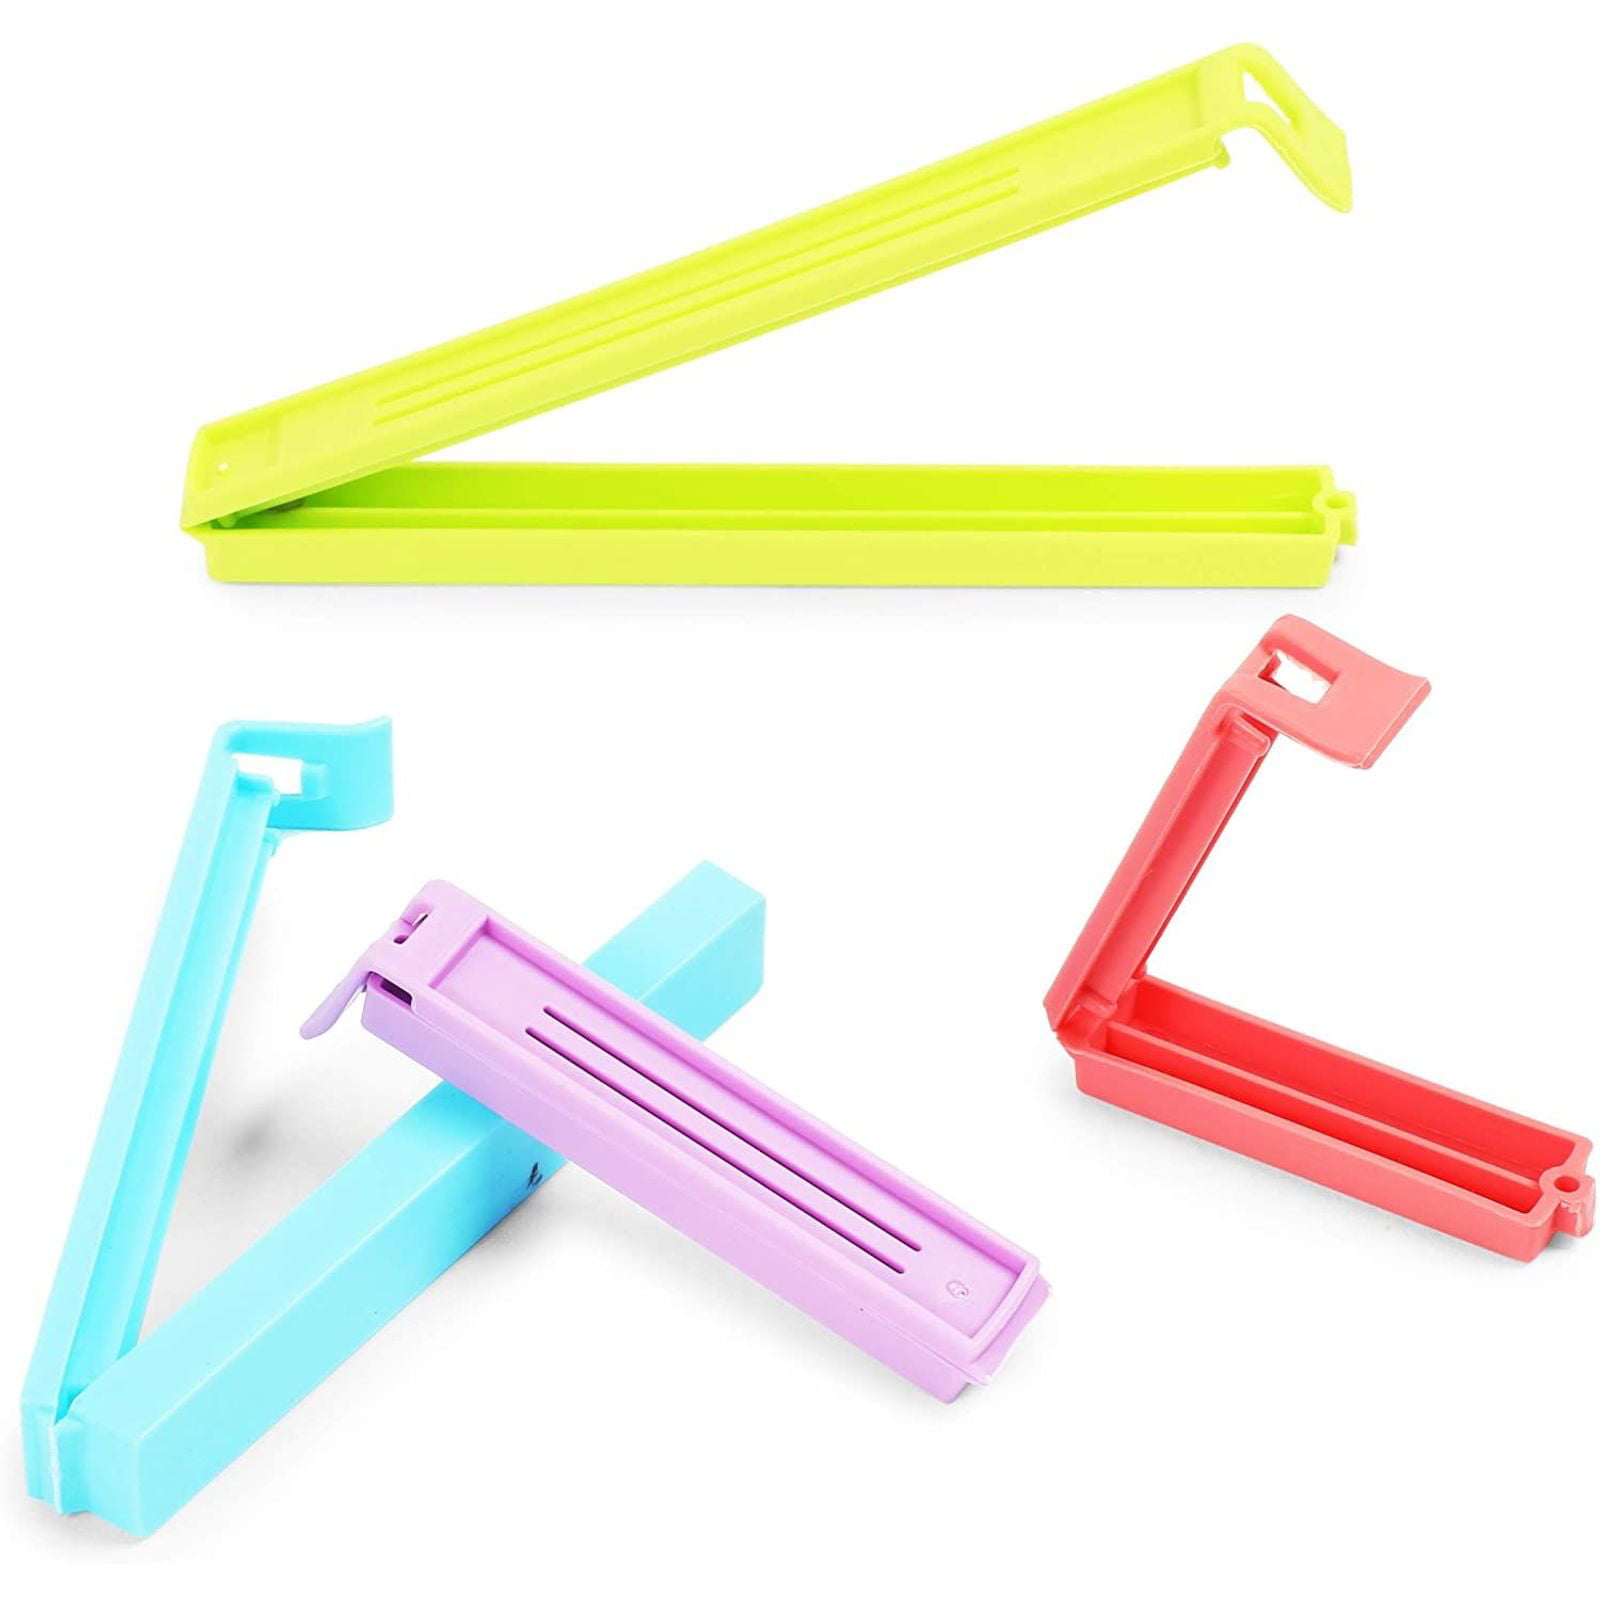 Plastic Food Bag Clips Colorful Food Fresh Accessories Home Use Storage Bag  Sealing Clips From Mlife, $1.11